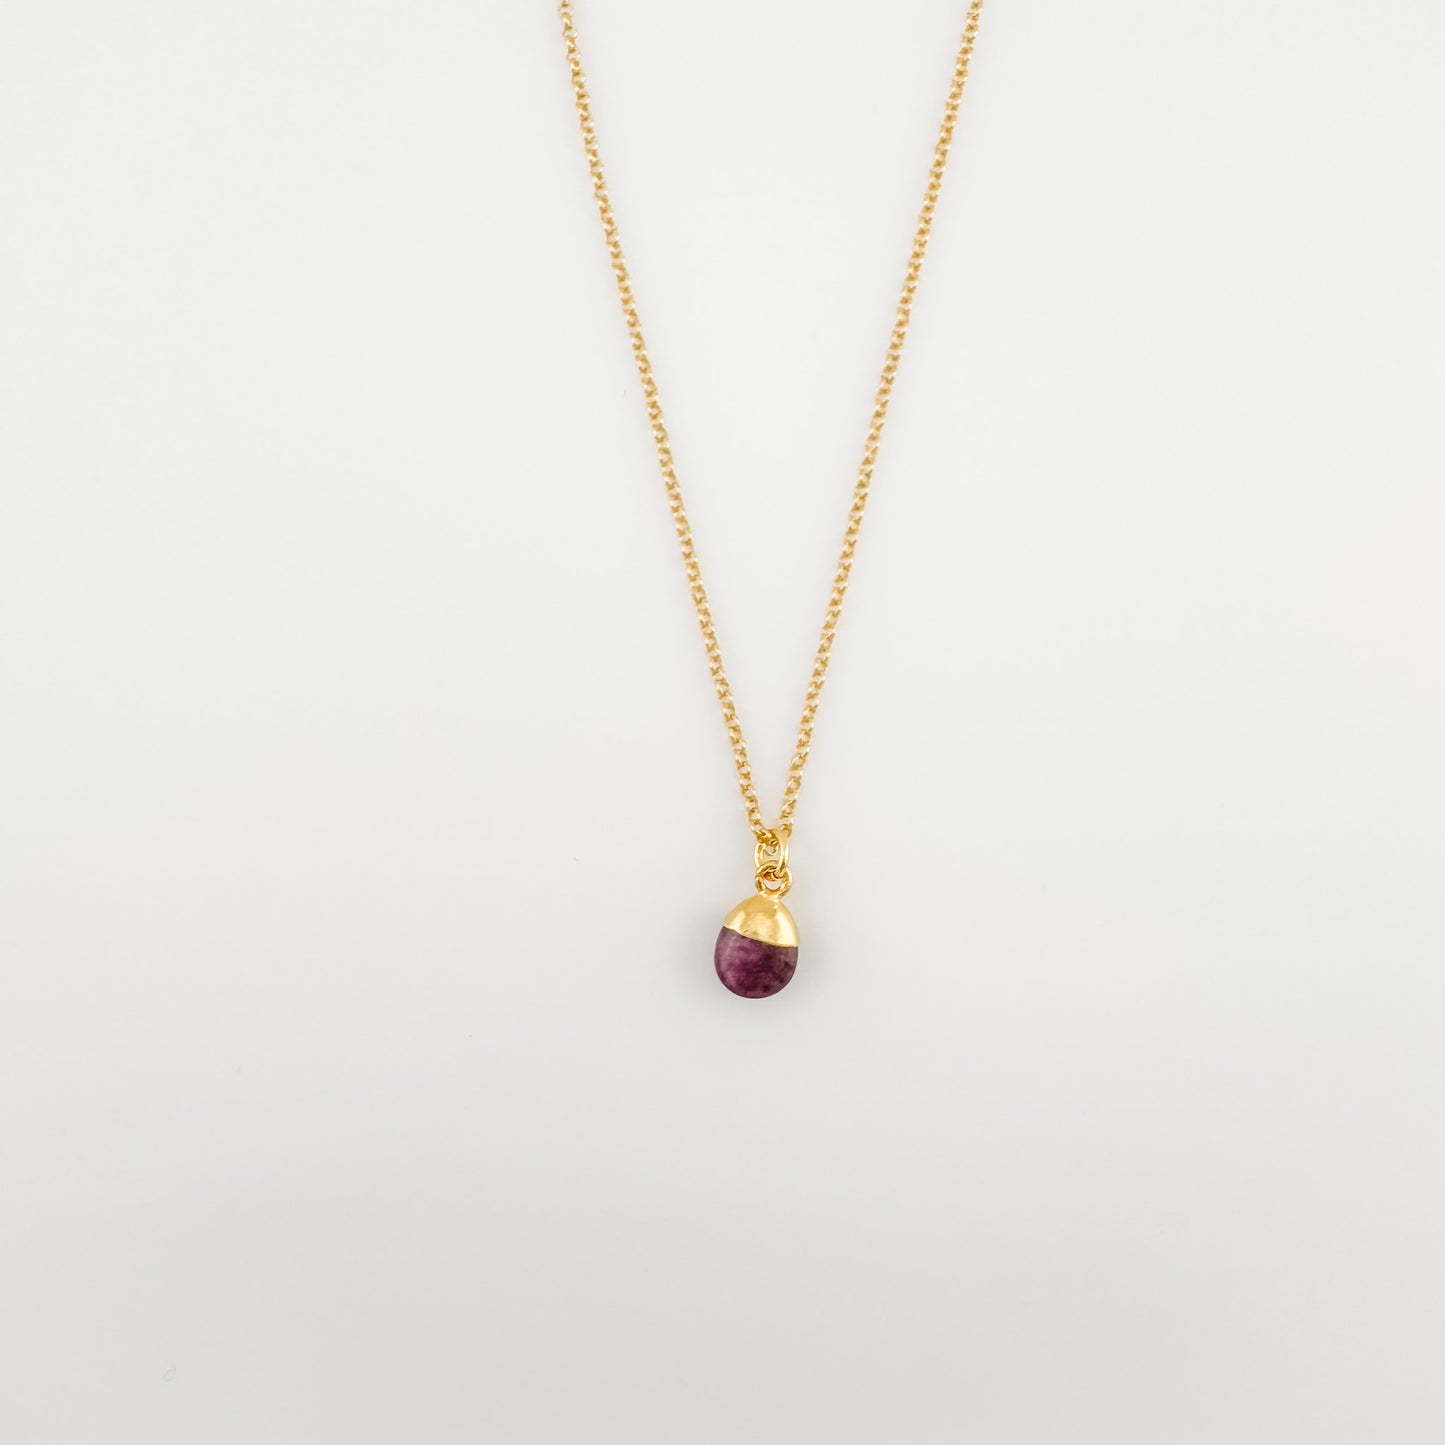 Ruby tumbled necklace